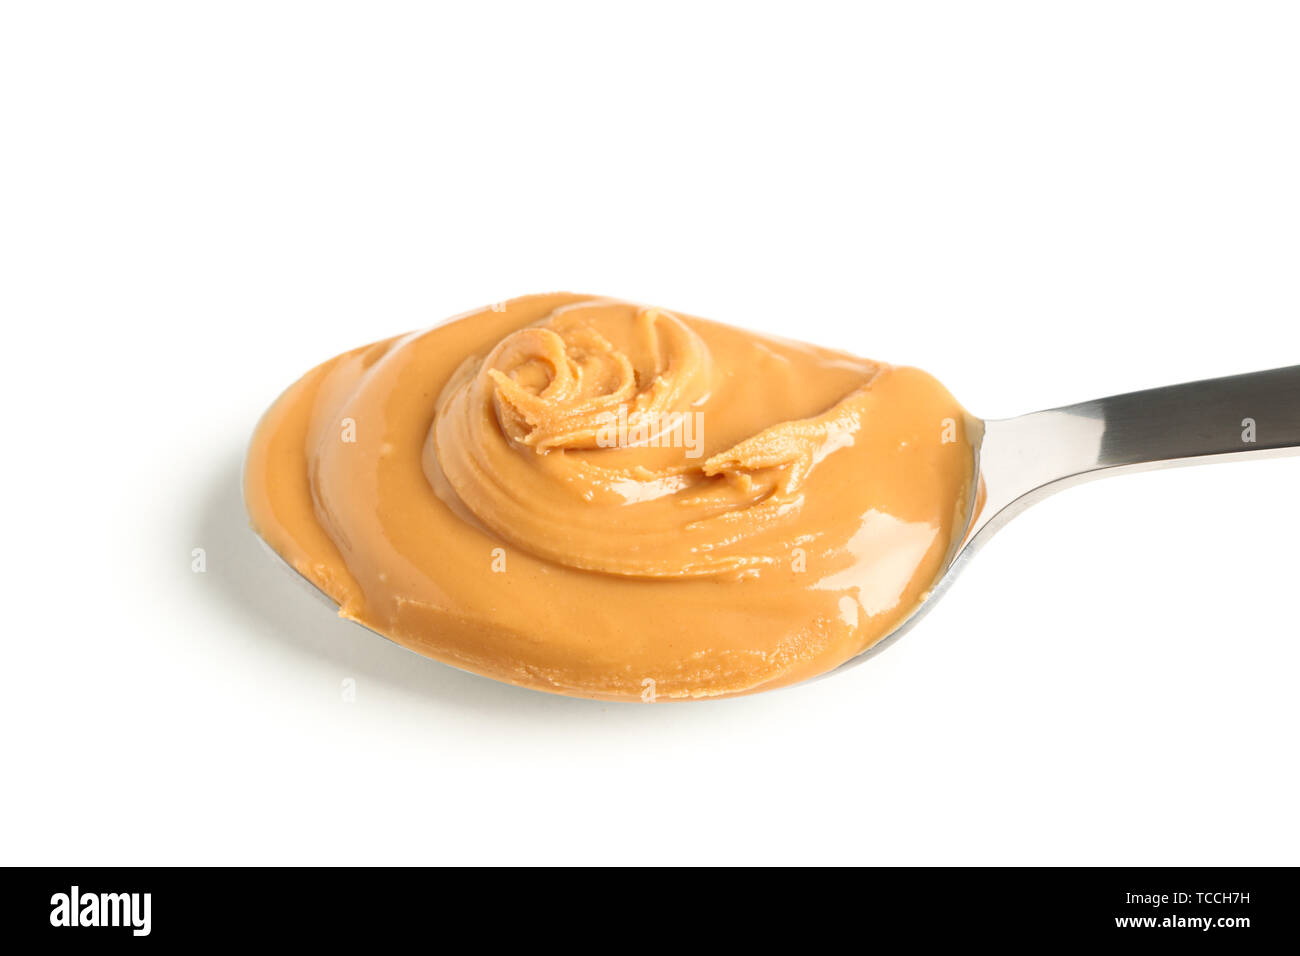 https://c8.alamy.com/comp/TCCH7H/creamy-peanut-butter-in-spoon-isolated-on-white-background-closeup-a-traditional-product-of-american-cuisine-TCCH7H.jpg